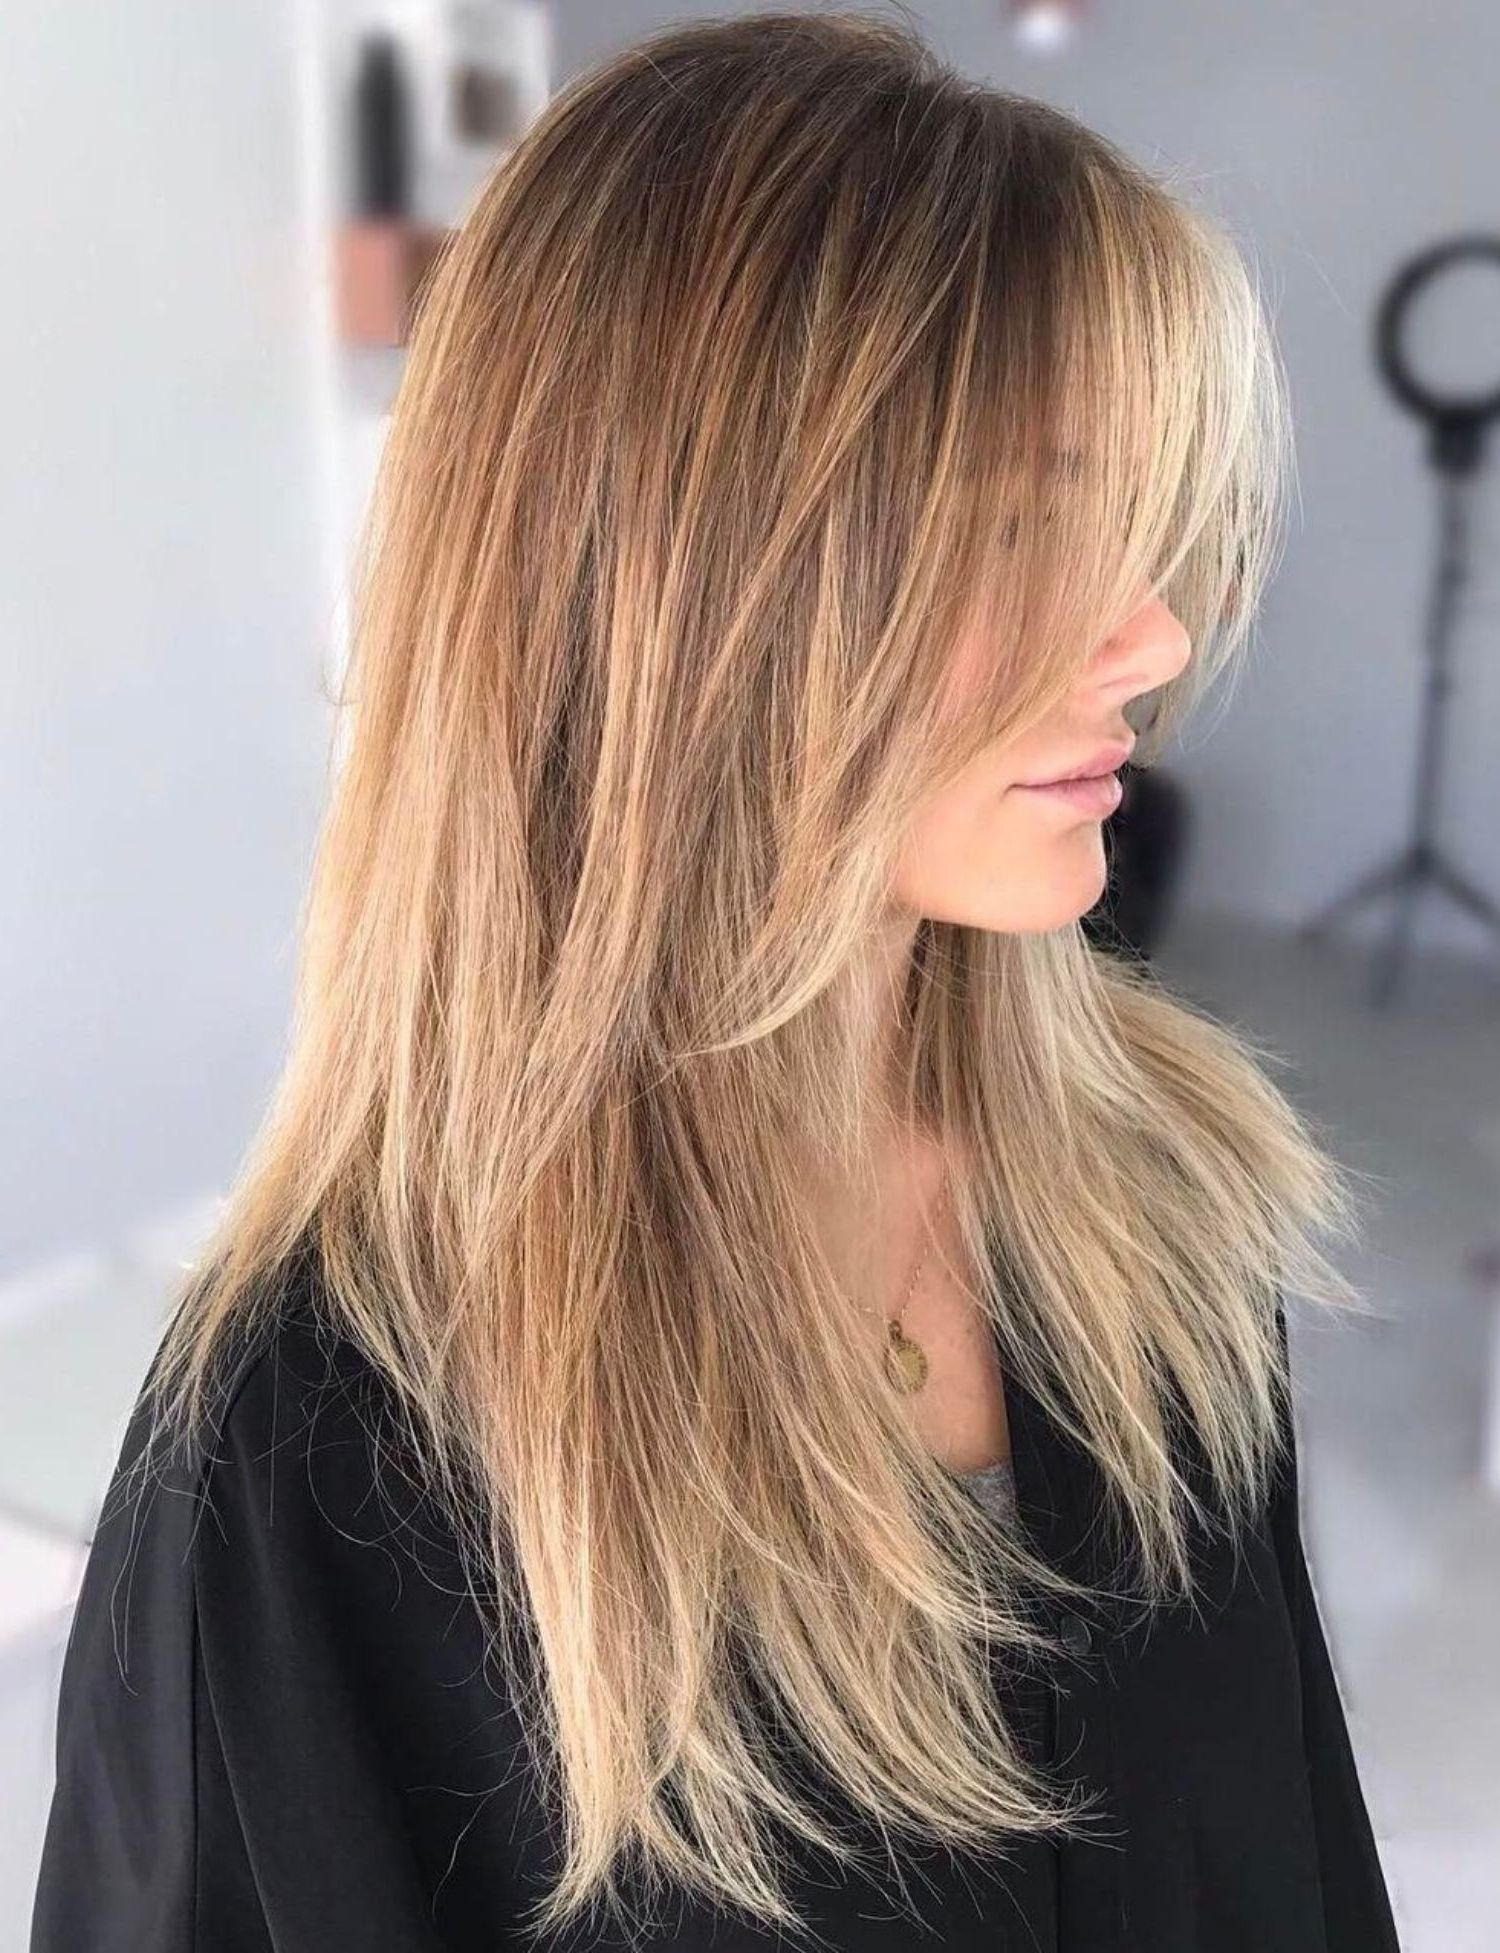 60 Lovely Long Shag Haircuts For Effortless Stylish Looks In Throughout 2019 Long Layered Shag Hairstyles With Balayage (View 1 of 20)